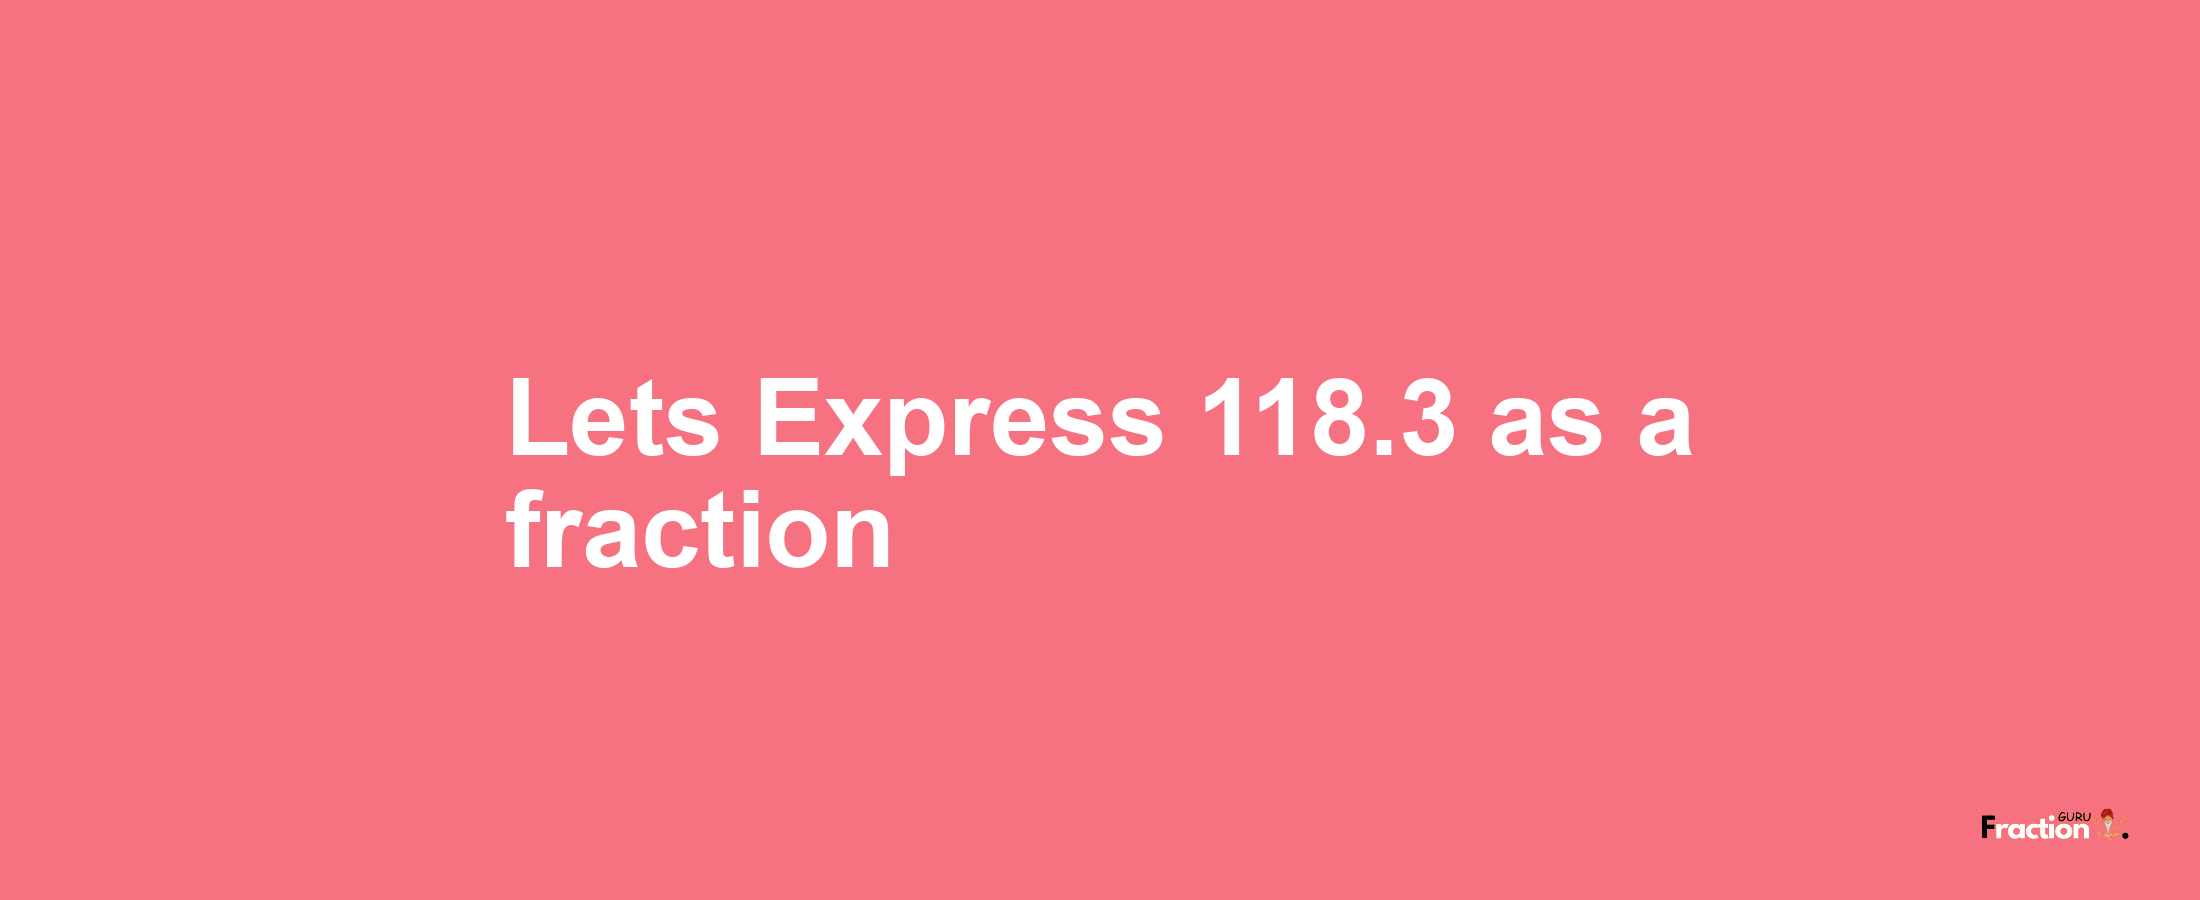 Lets Express 118.3 as afraction